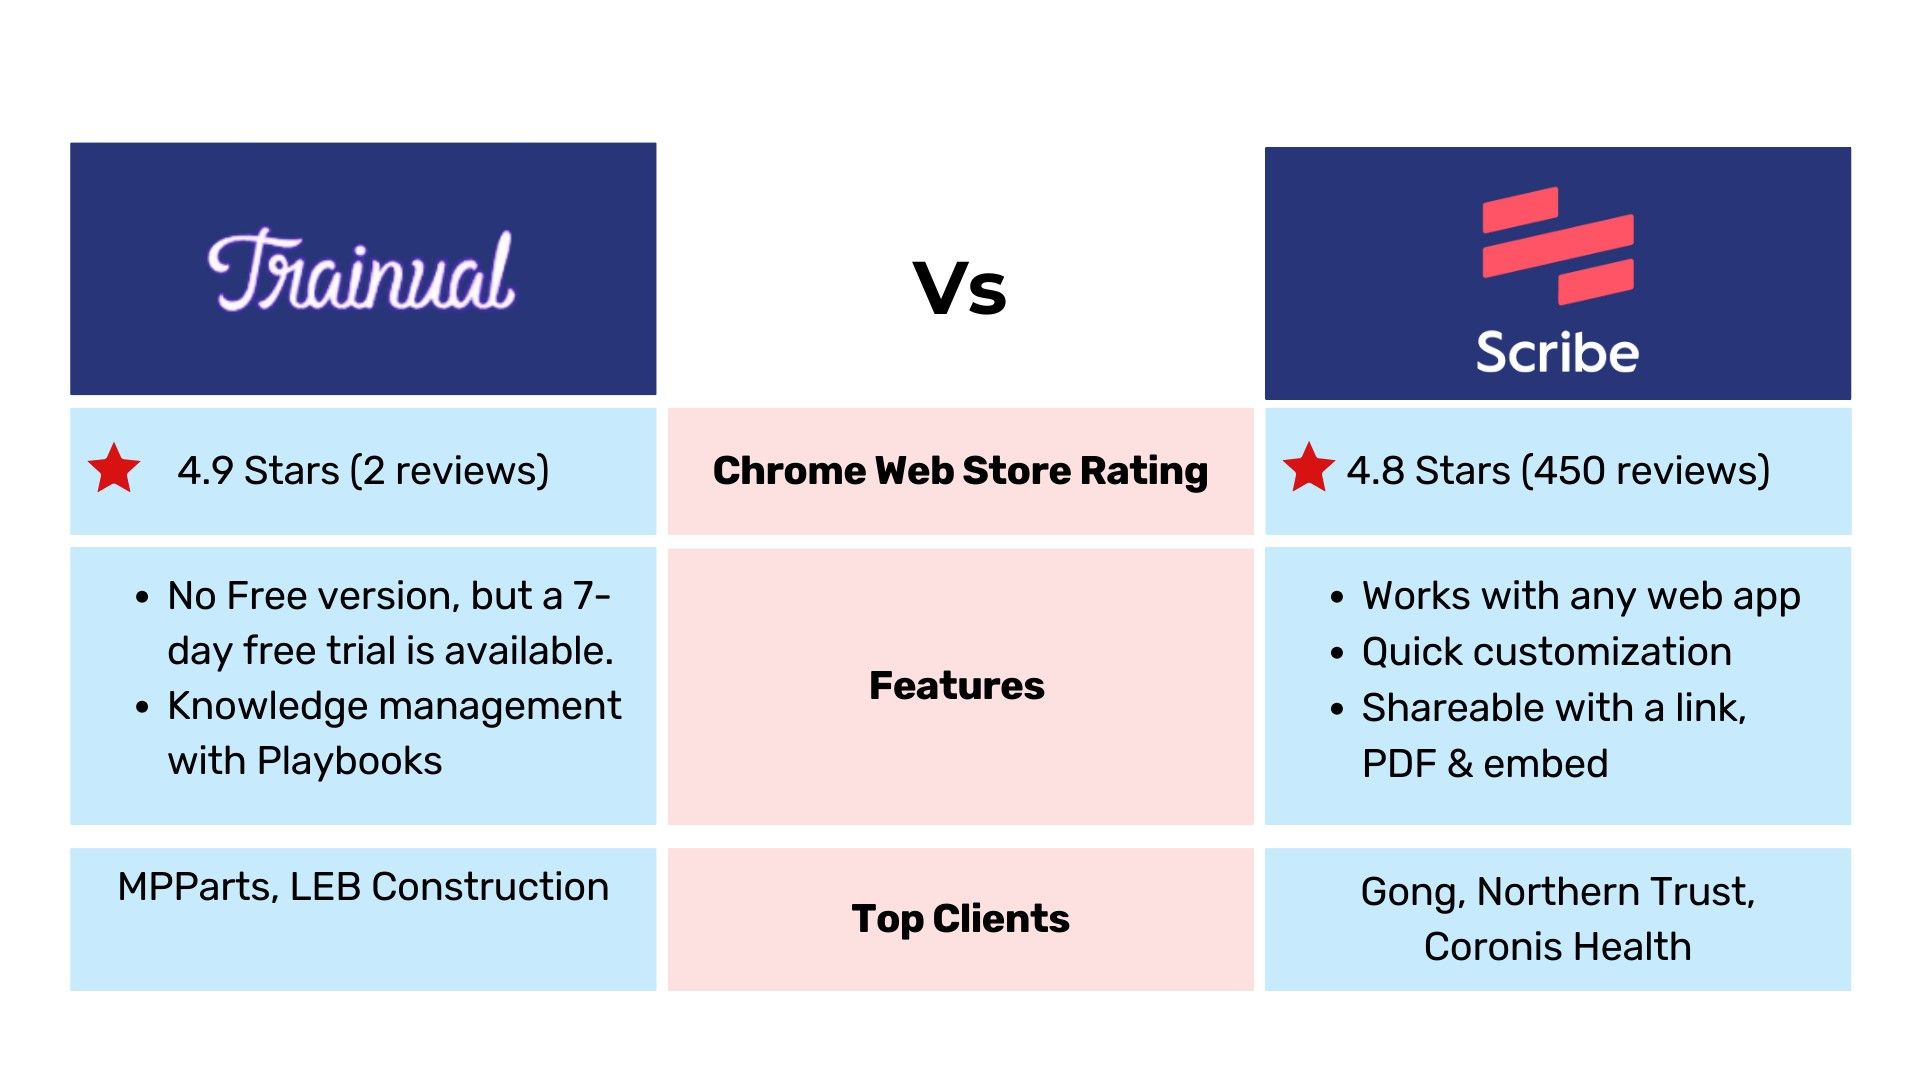 Trainual Vs Scribe comparison table with rating, features, top clients